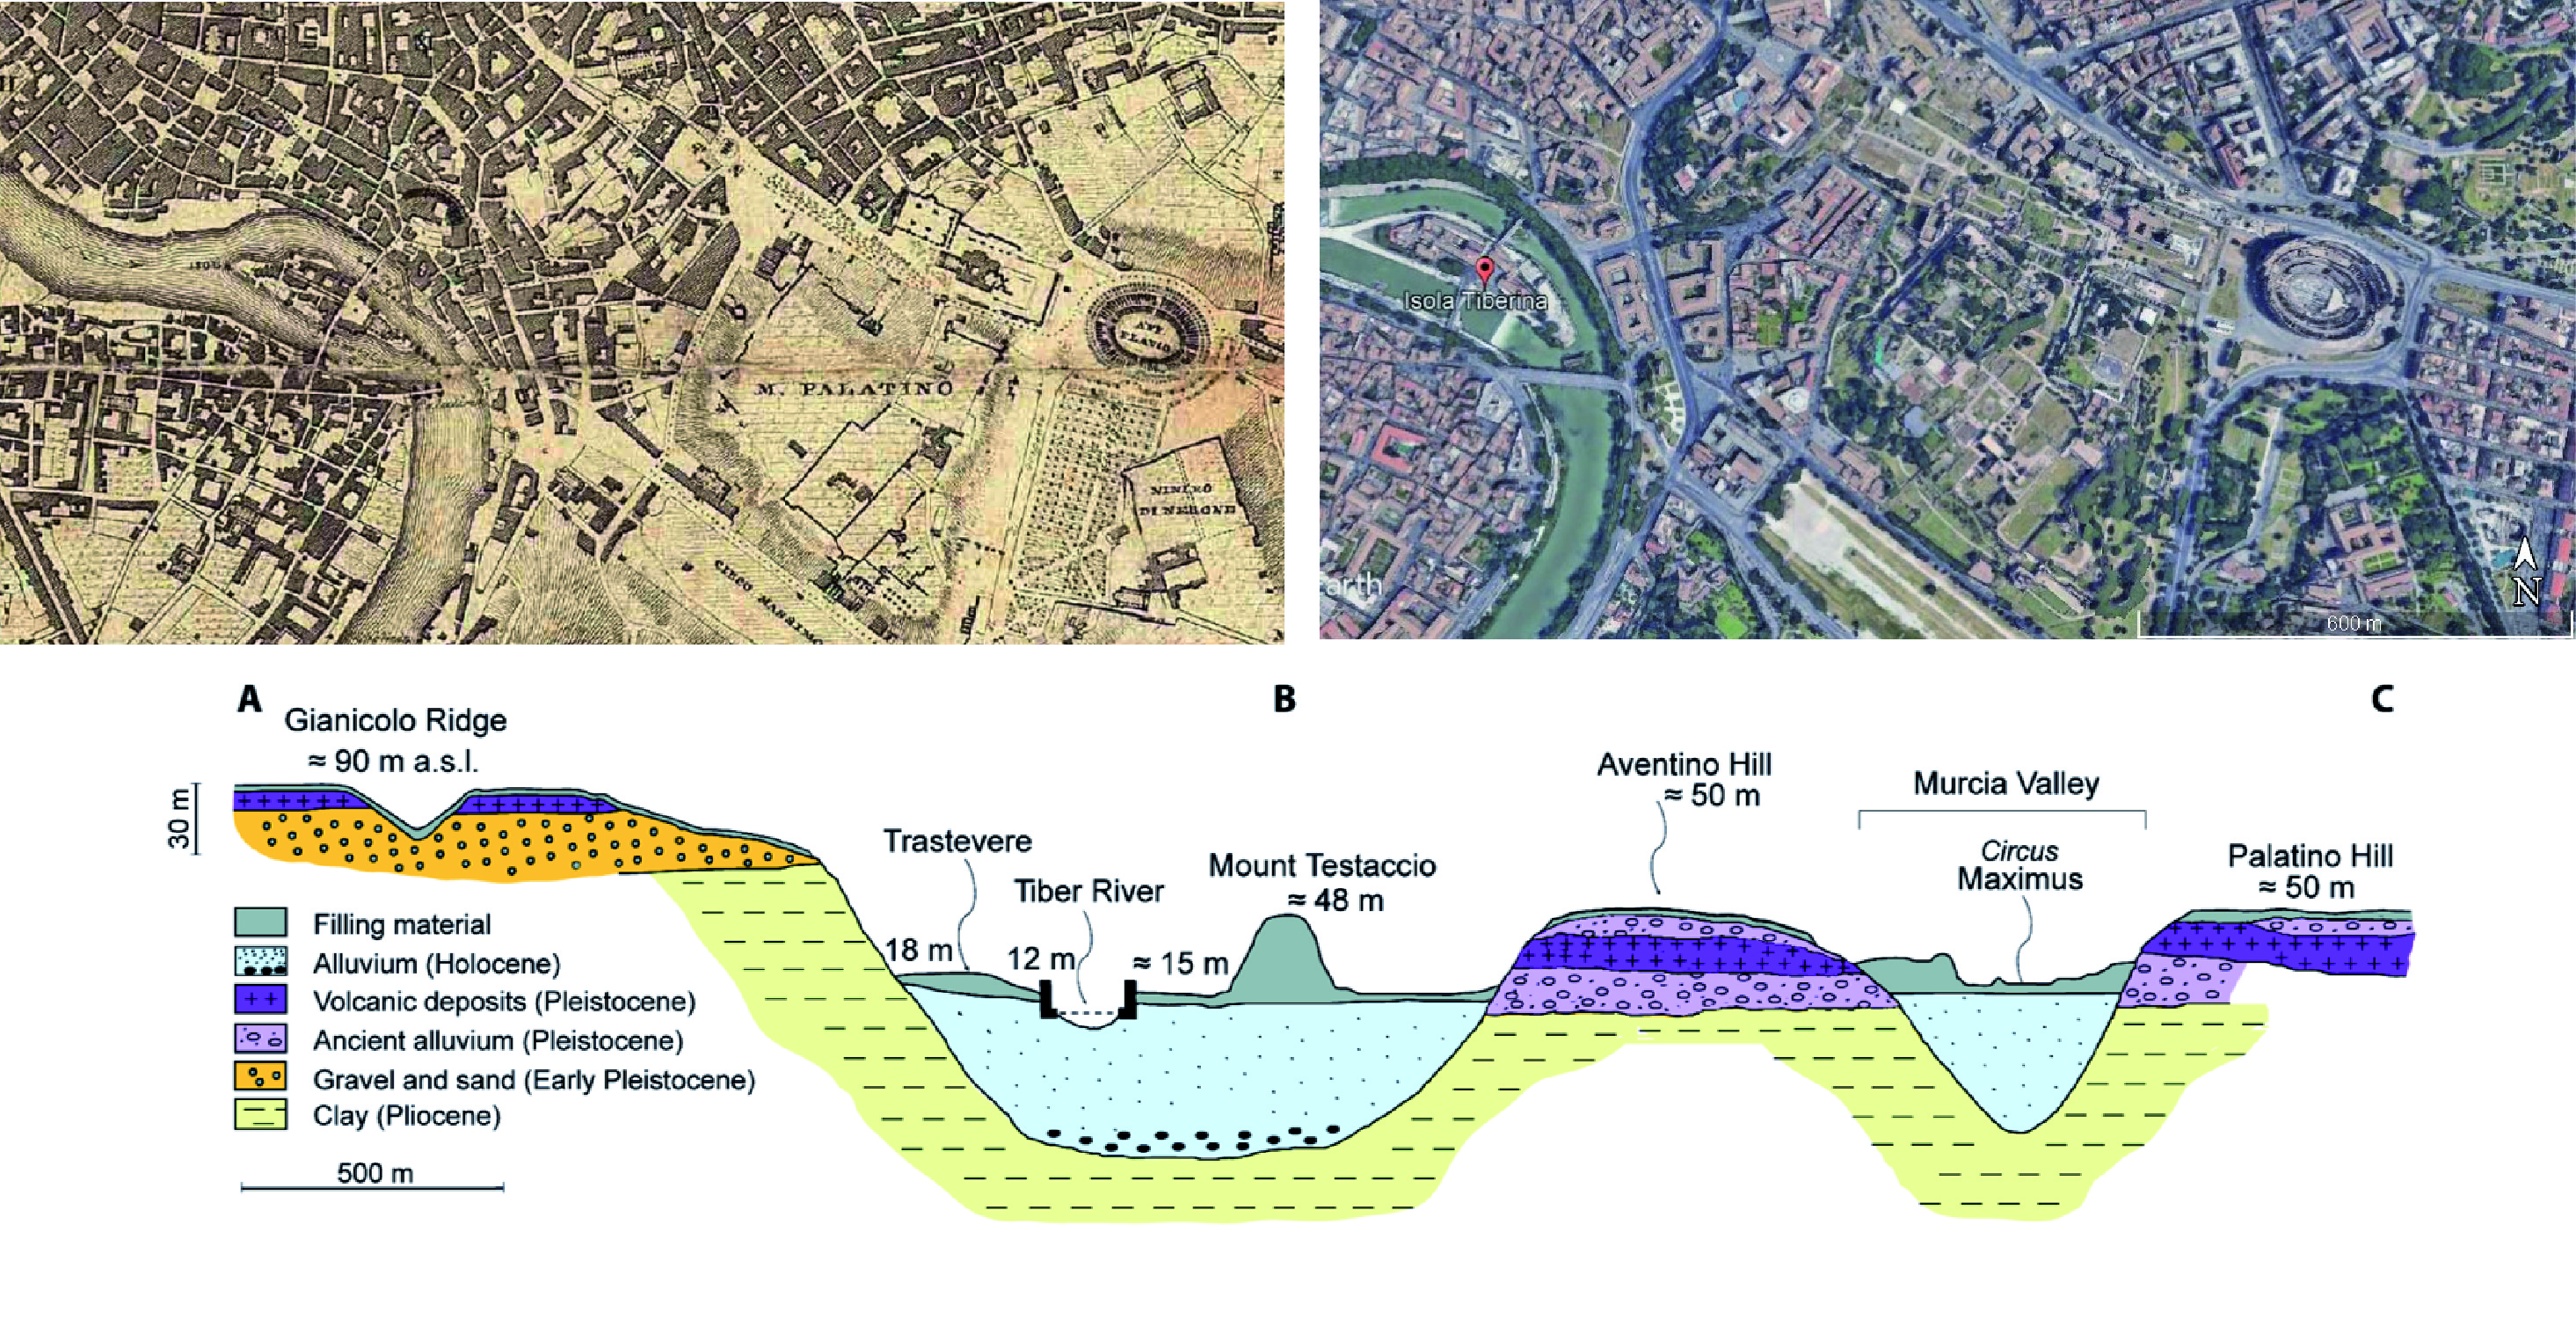 Multitemporal and multidisciplinary investigations in the urban landscape of Rome